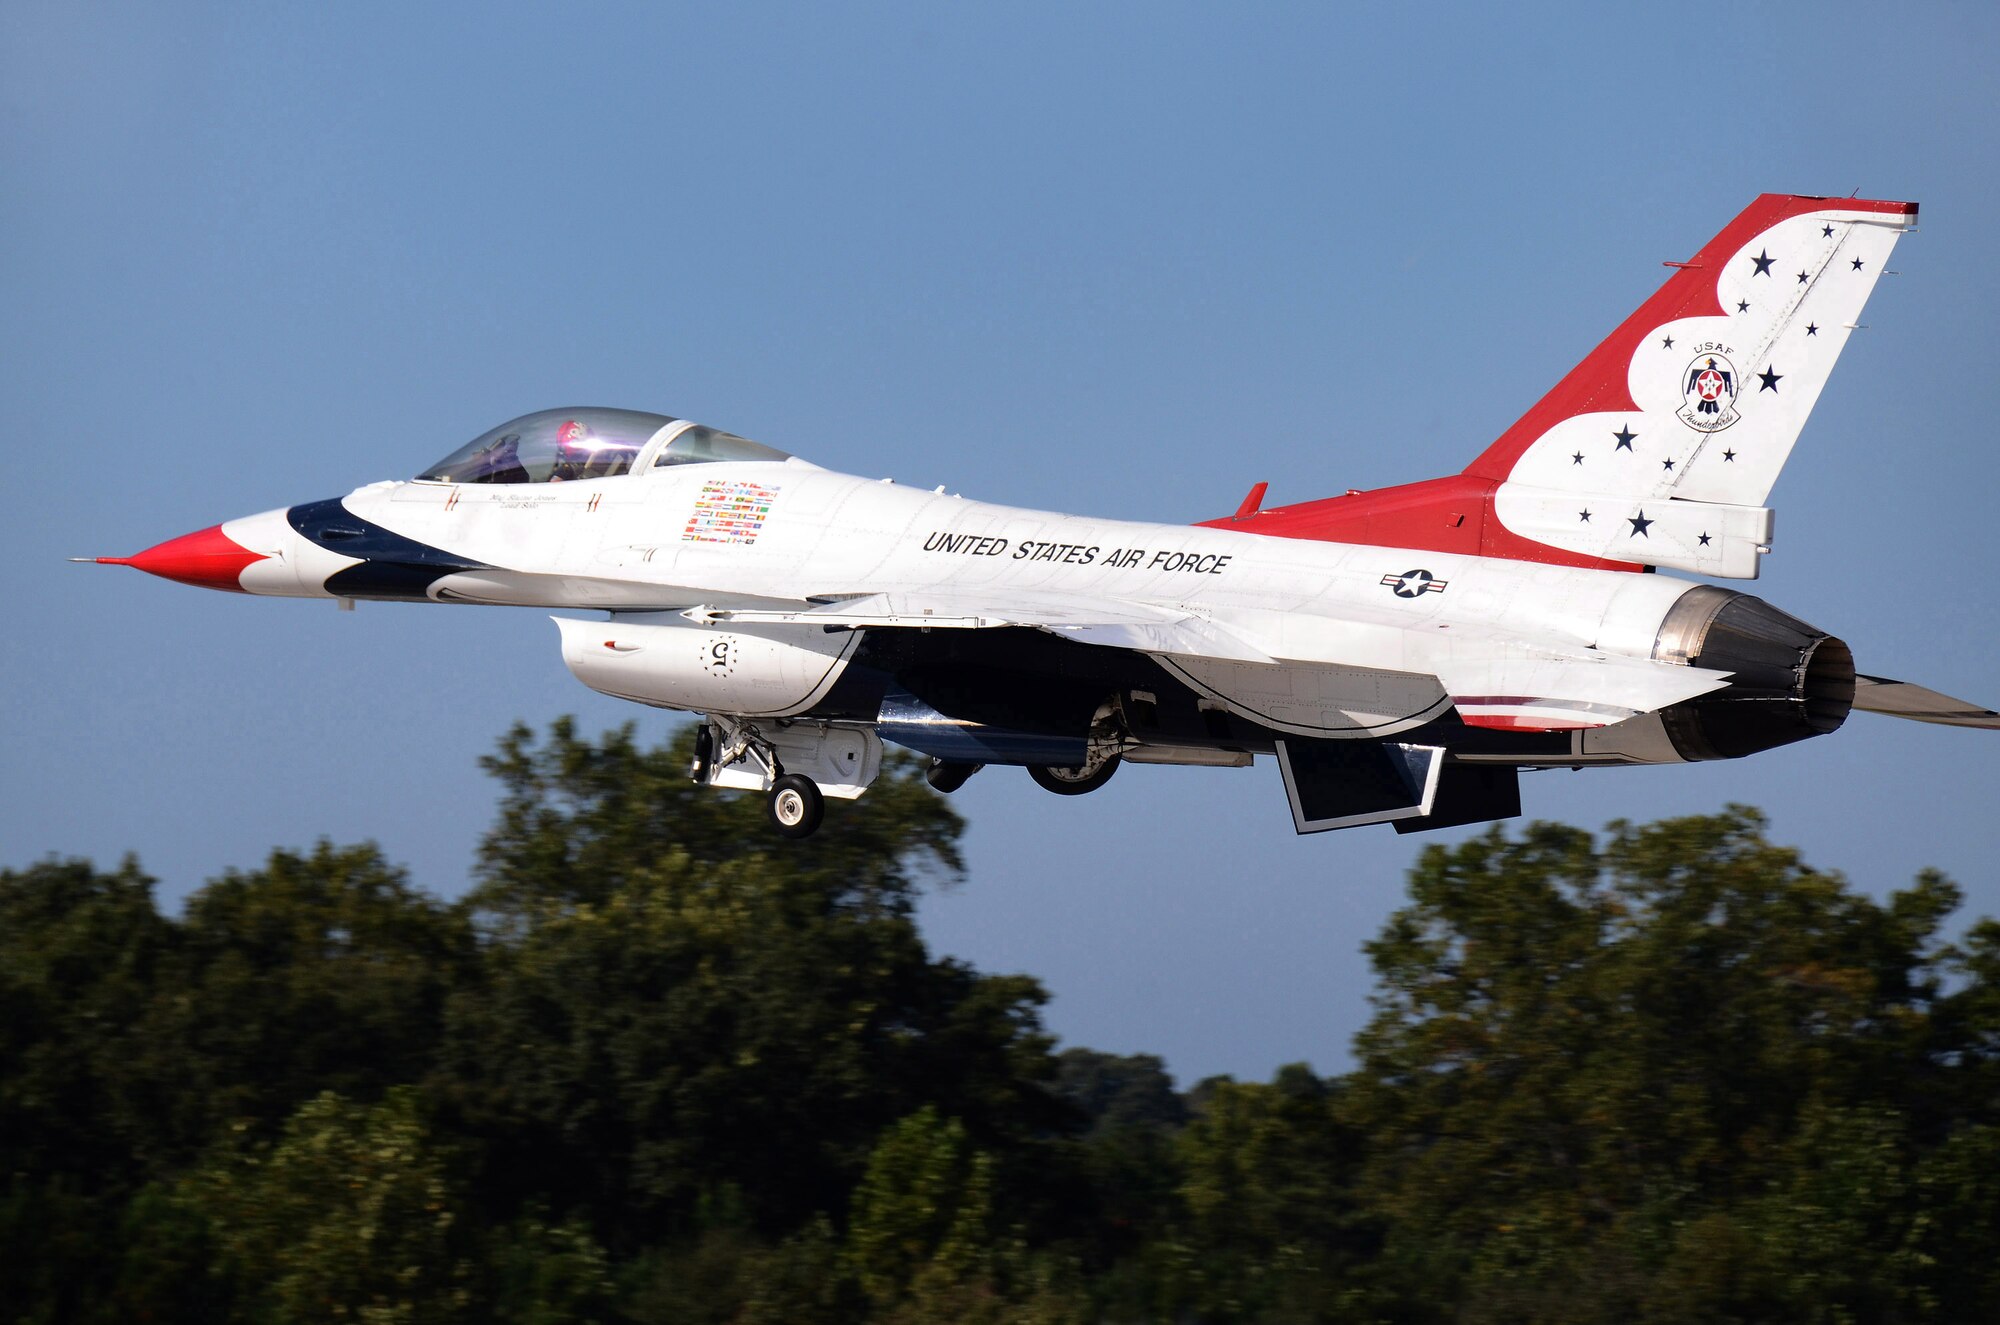 Thunderbird #5, Maj. Blaine Jones, flying lead solo, departs Dobbins Air Reserve Base for the Wings Over North Georgia air show Oct. 18, 2014. The USAF Air Demonstration Squadron Thunderbirds are using Dobbins as their base of operations for their performances at the air show this weekend at the Russell Regional Airport in Rome, Georgia. (U.S. Air Force photo/ Brad Fallin/Released)